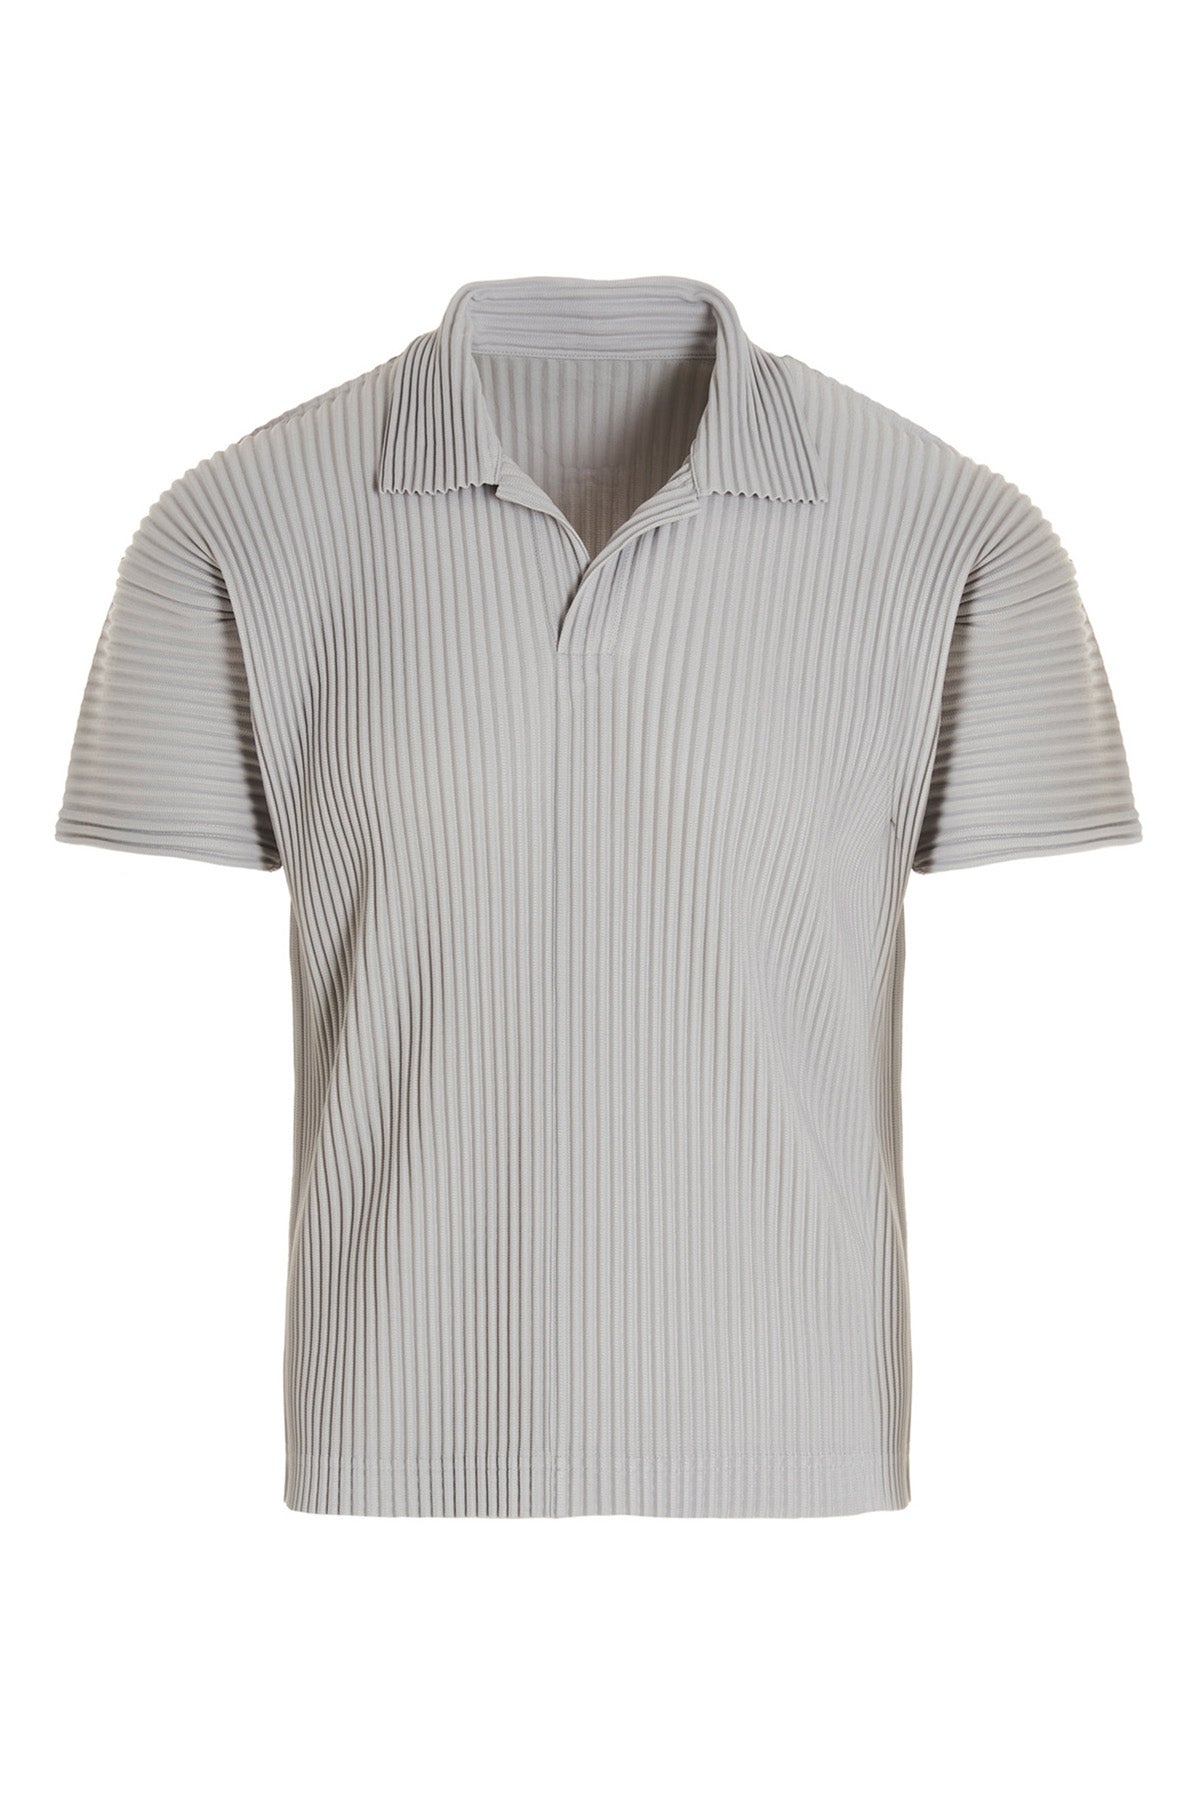 HOMME PLISSE' ISSEY MIYAKE PLEATED POLO SHIRT